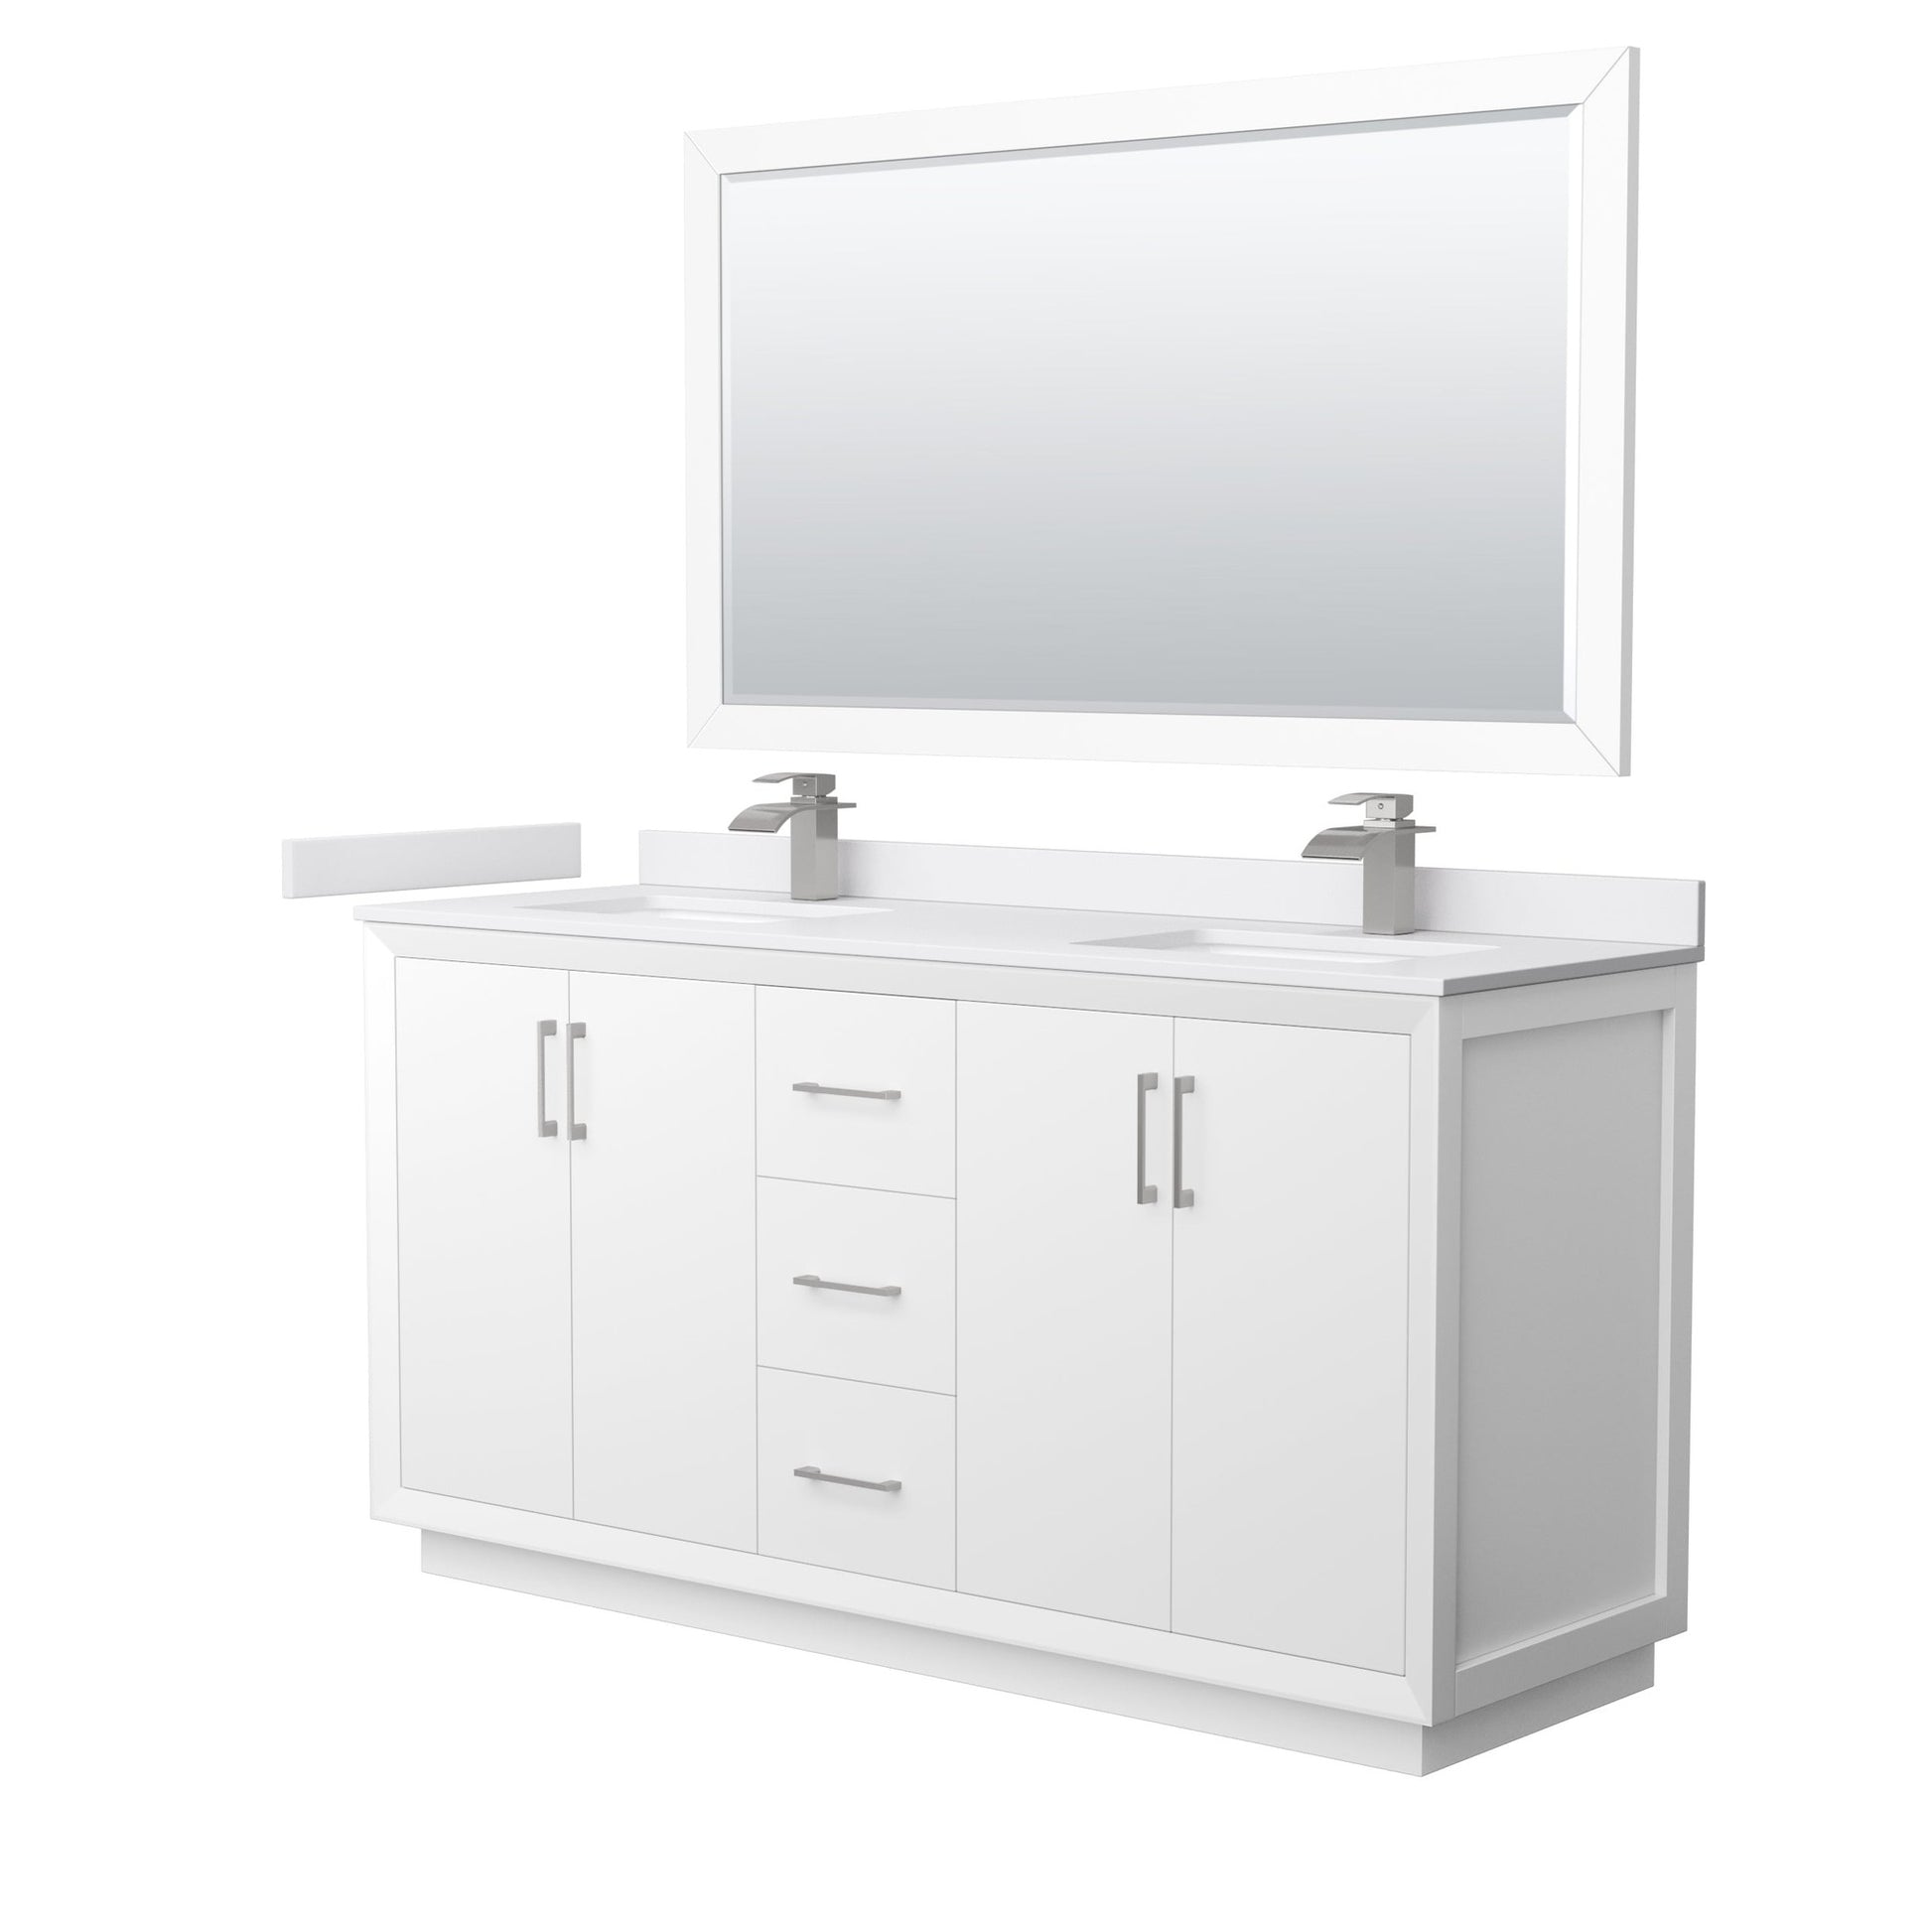 Wyndham Collection Strada 66" Double Bathroom Vanity in White, White Cultured Marble Countertop, Undermount Square Sink, Brushed Nickel Trim, 58" Mirror